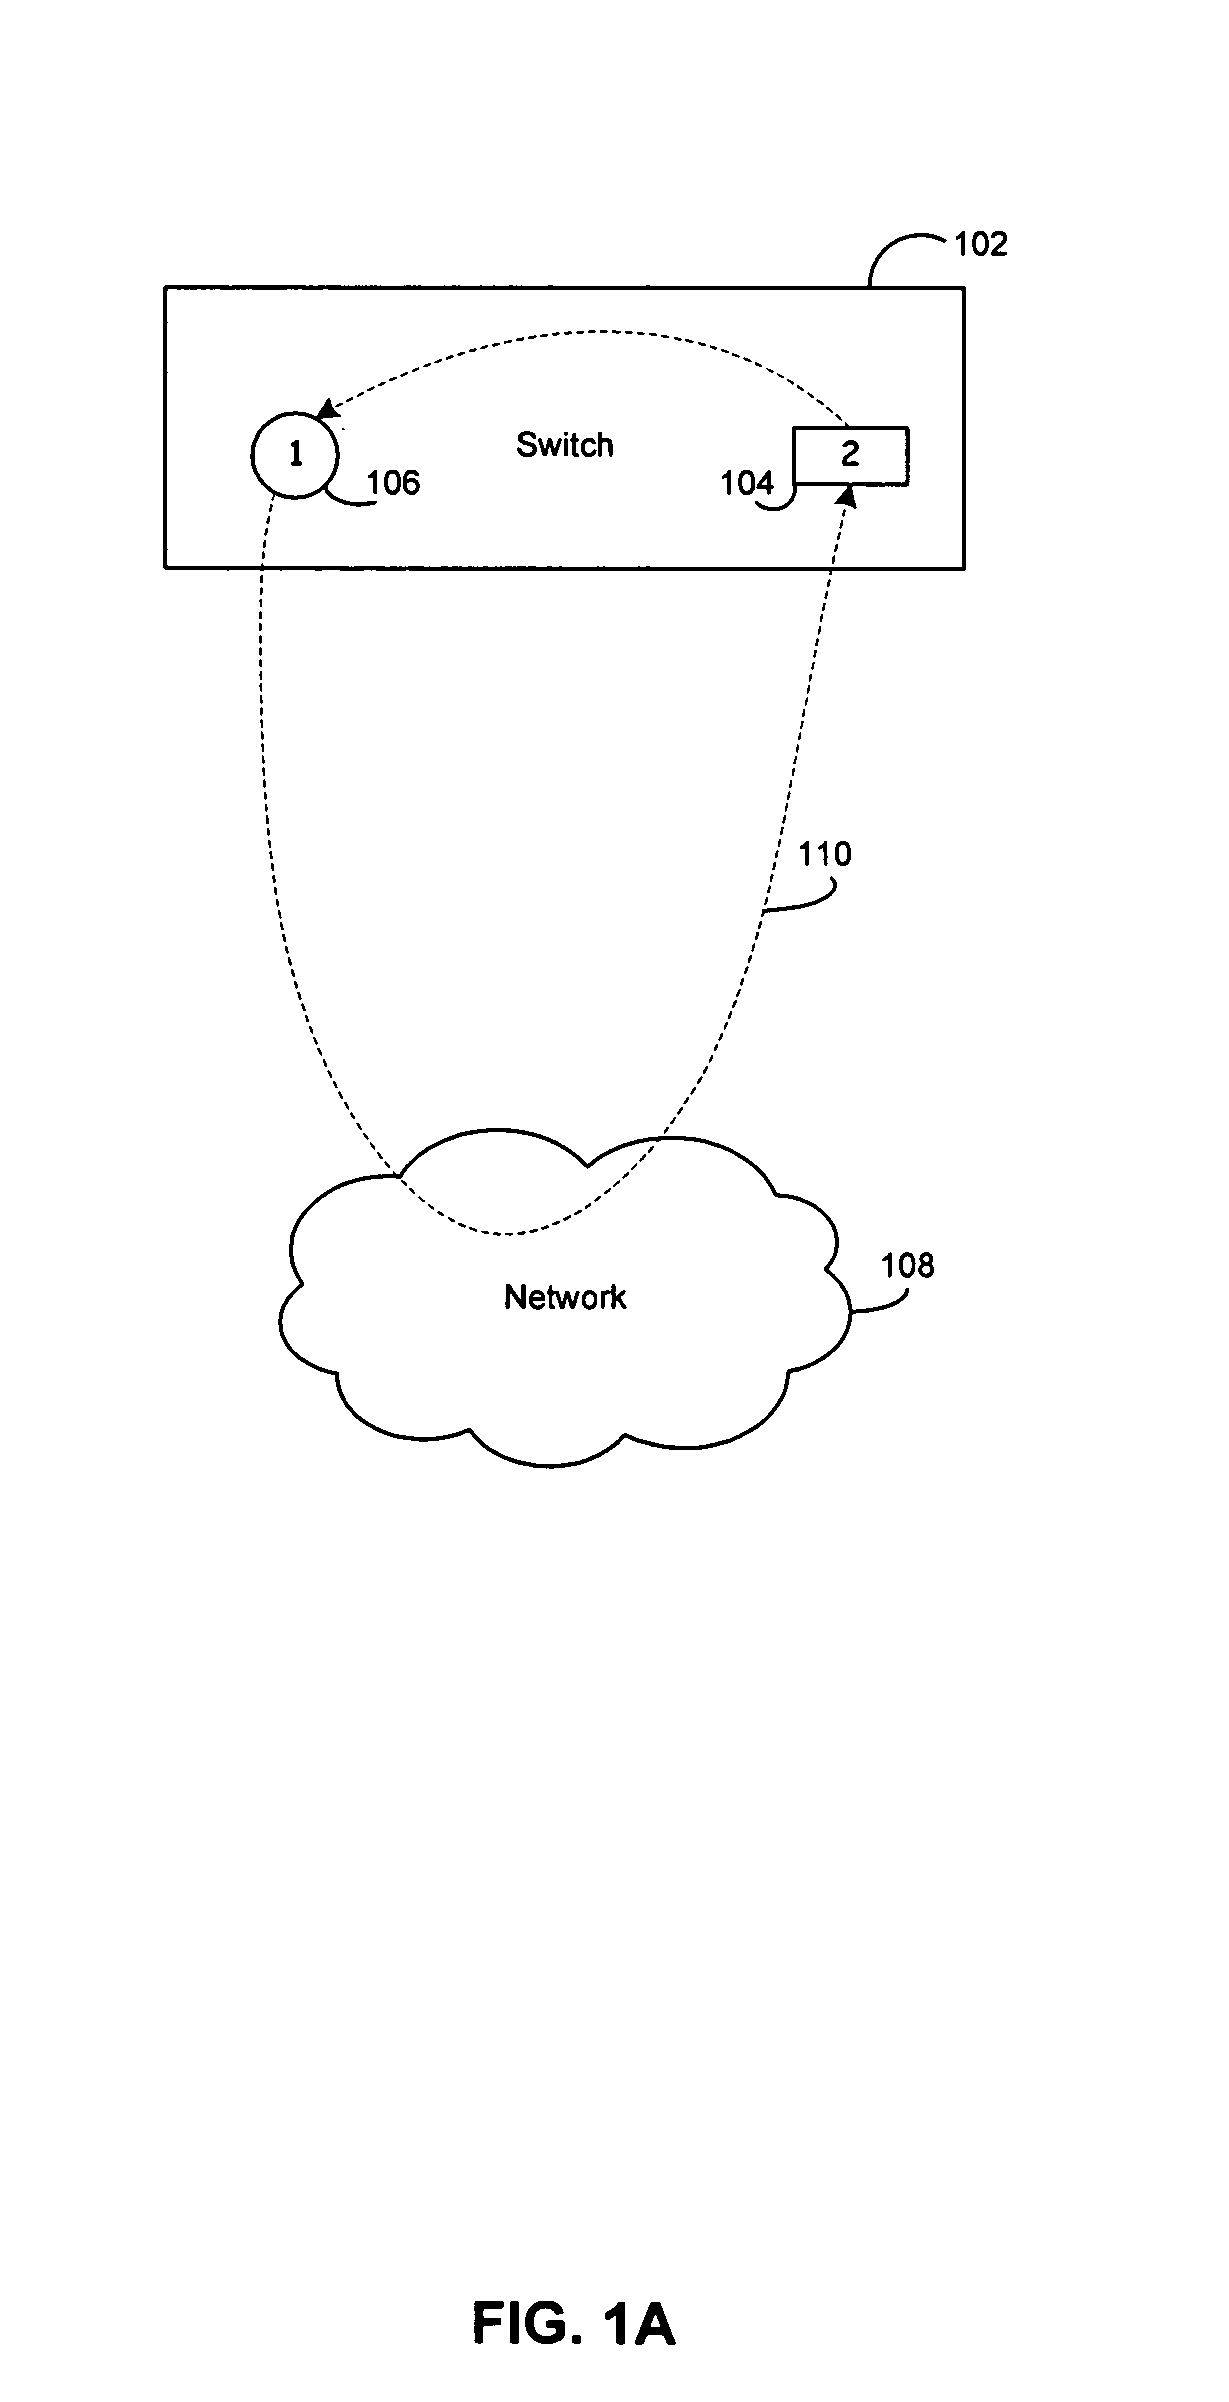 Method and system for intrusion detection and prevention based on packet type recognition in a network